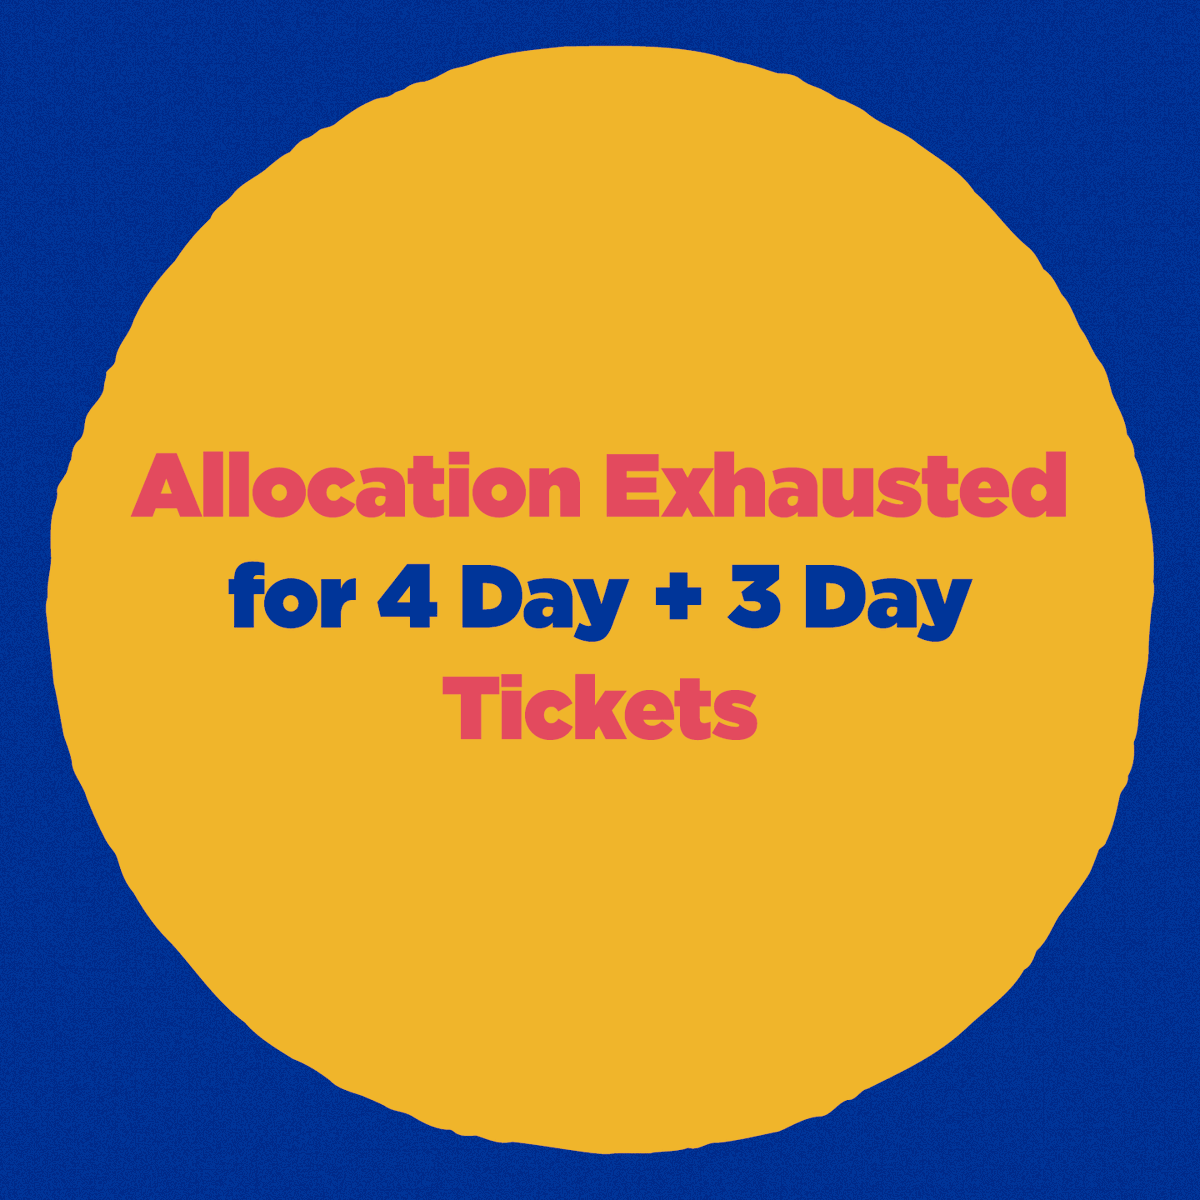 In addition to Saturday 11 March, the allocation of Festival 4 Day + 3 Day (Fri-Sun + Sat-Mon) passes are now exhausted. The only remaining tickets are Friday, Sunday and Monday single day tickets. Book now - bit.ly/3Y2OGoJ